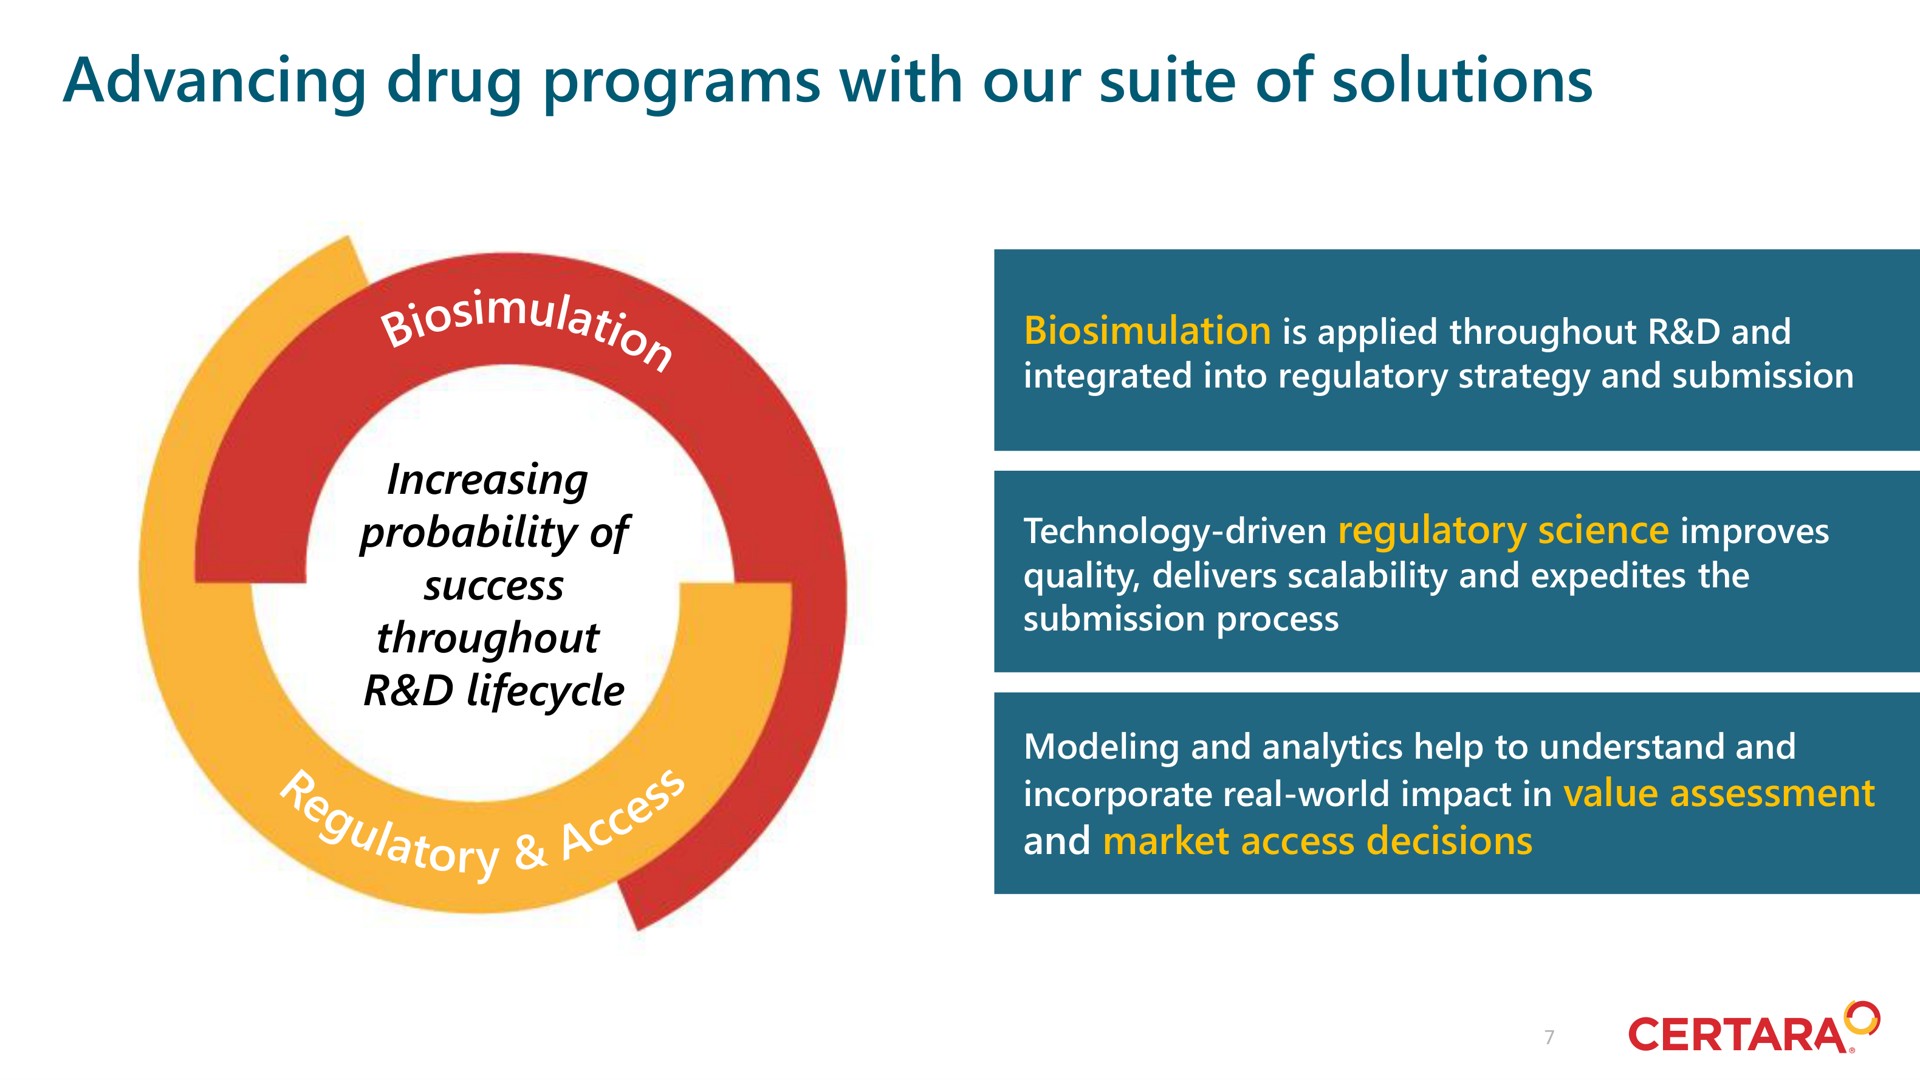 advancing drug programs with our suite of solutions | Certara